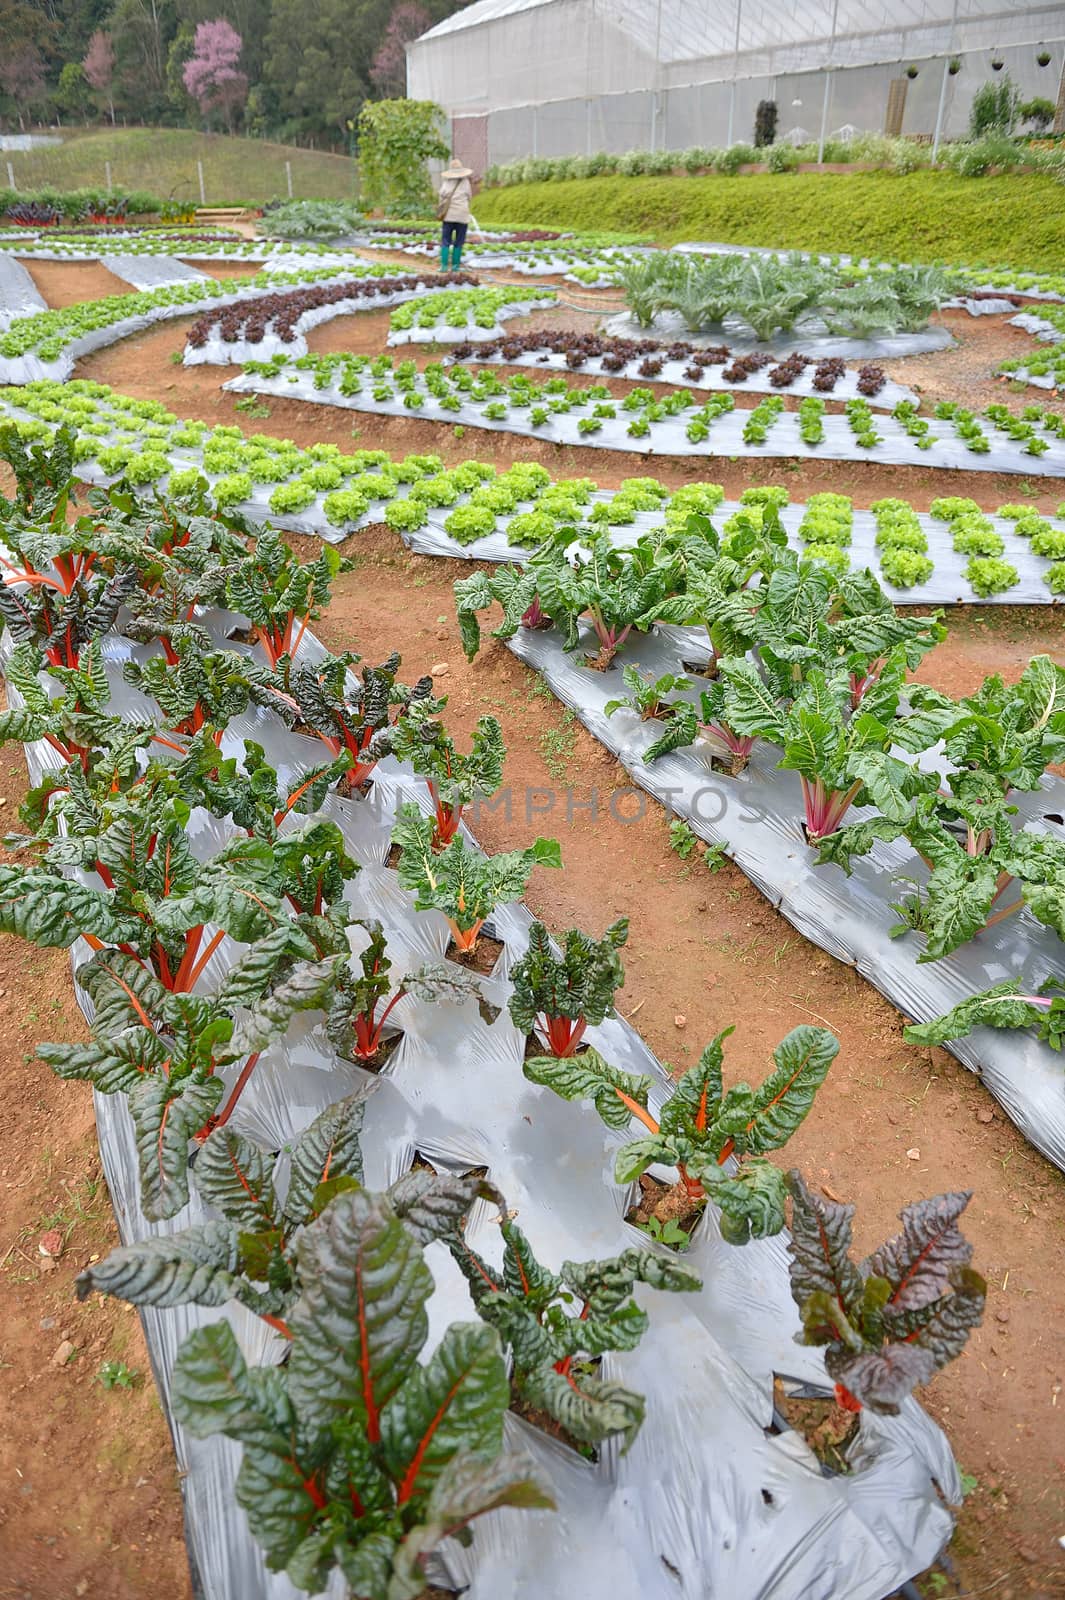 worker in veggie plot at Doi Angkhang royal project, Chiangmai, by think4photop